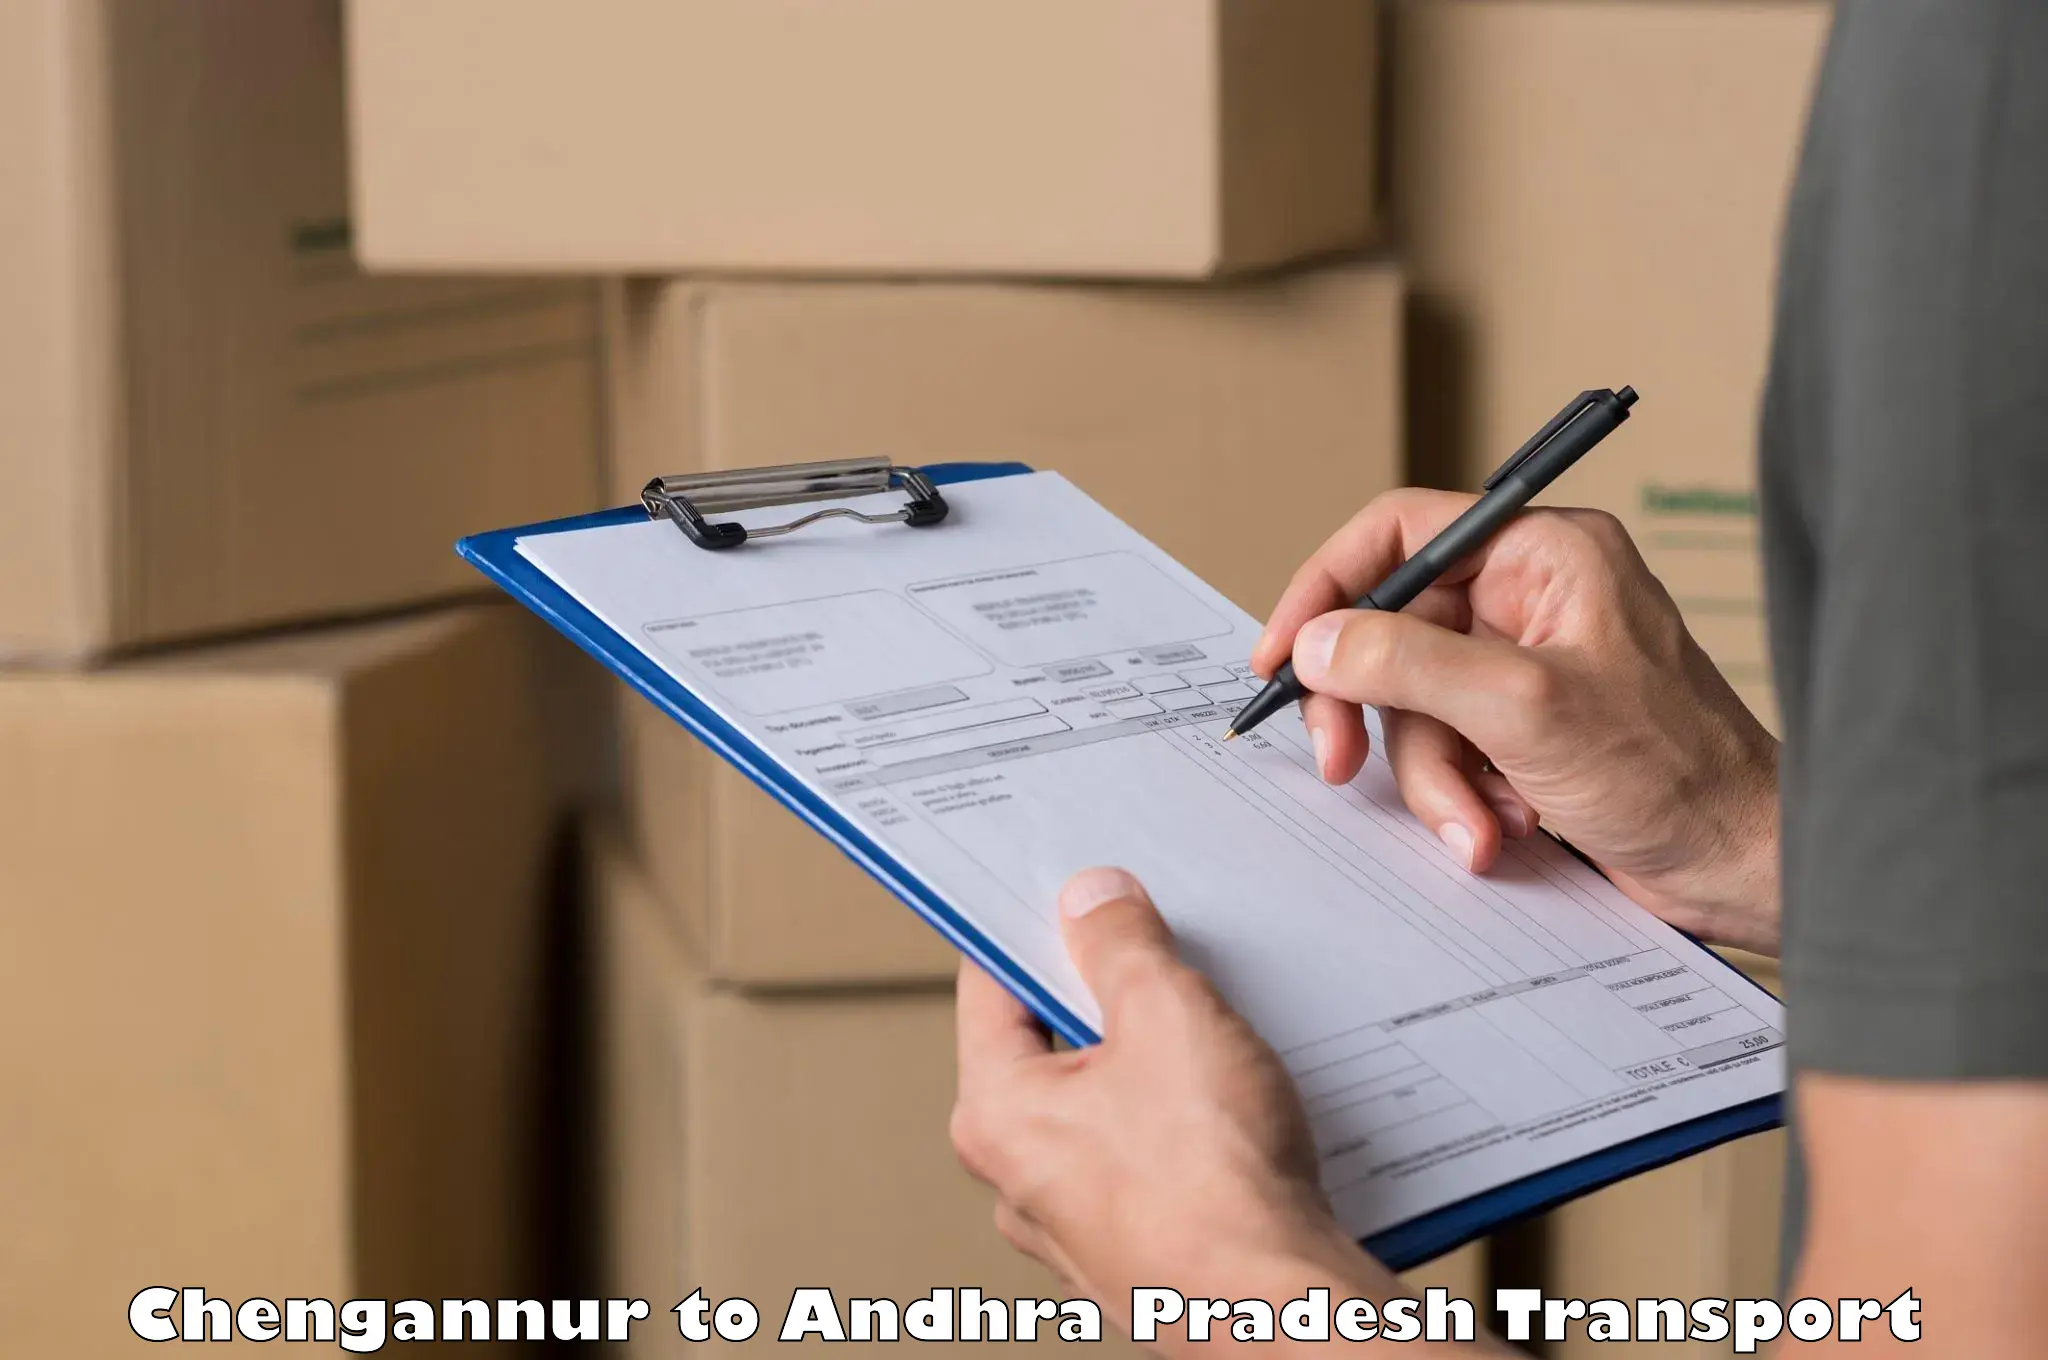 Goods delivery service Chengannur to Chirala